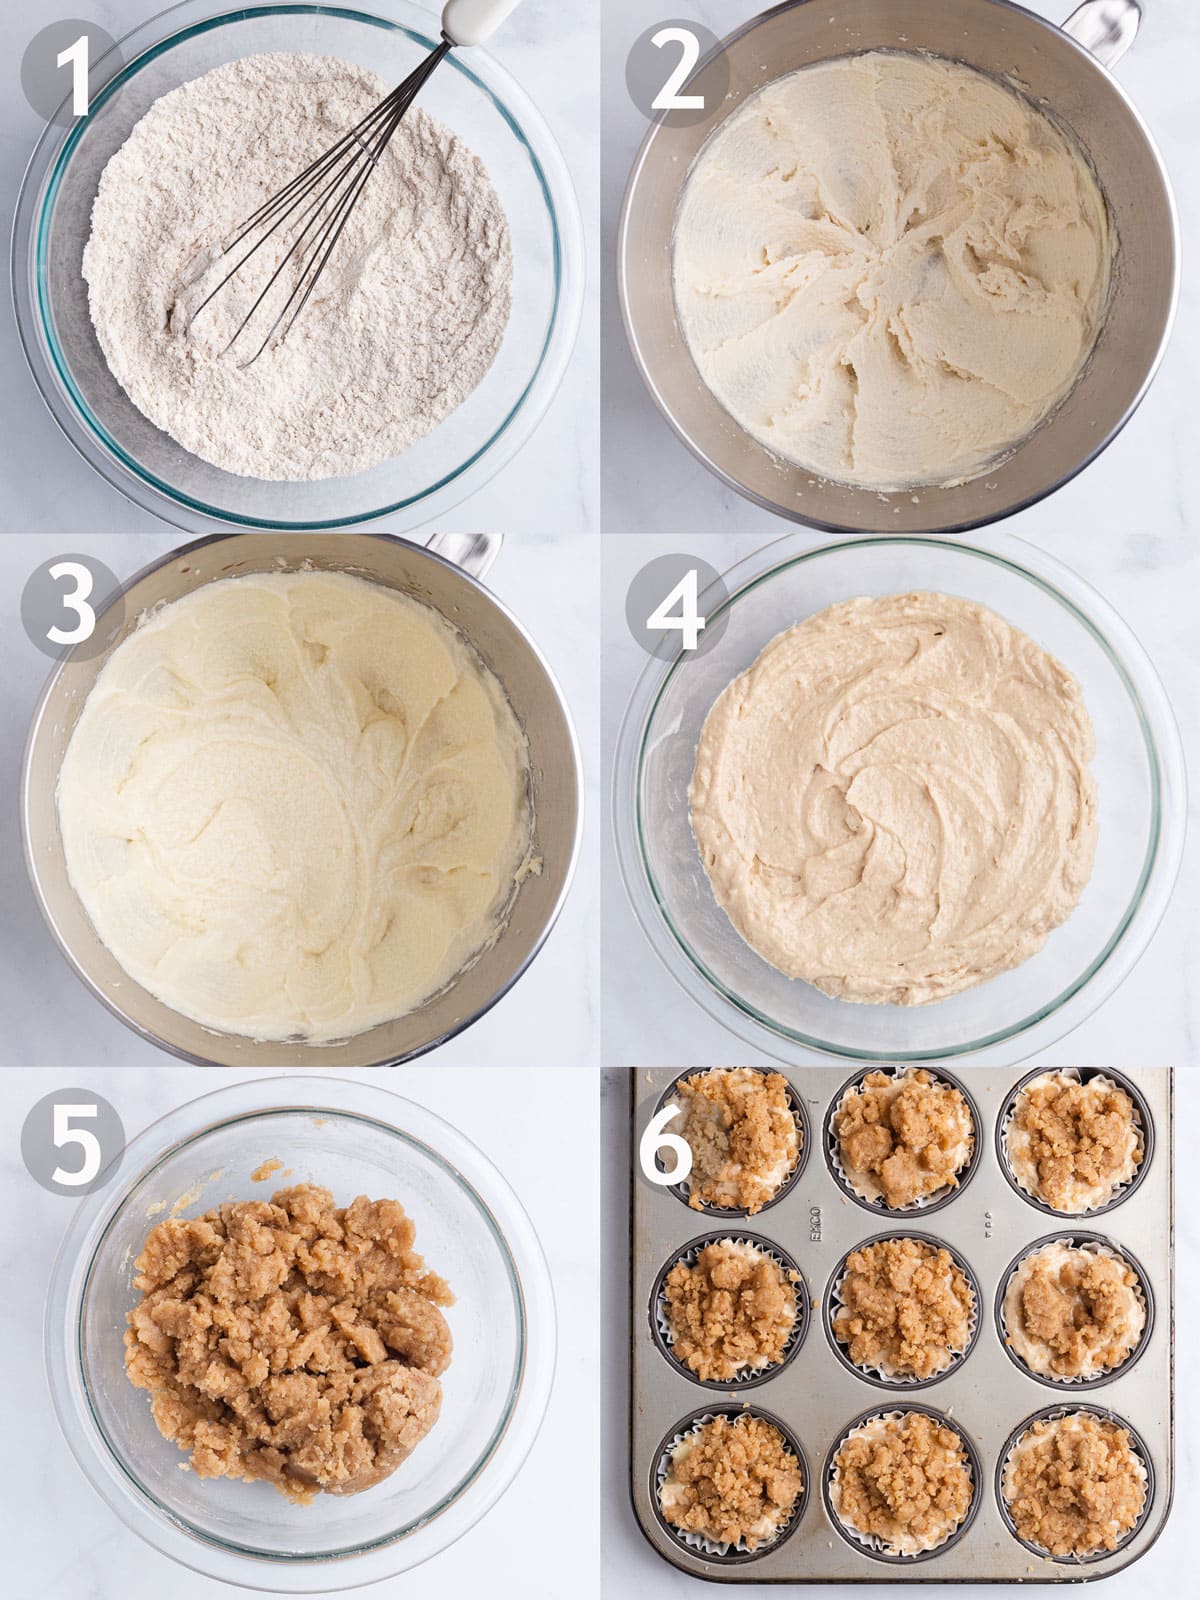 Steps to make muffins including mixing dry ingredients, mixing wet ingredients, combining all ingredients, folding in chopped apples, topping with crumbs and baking.